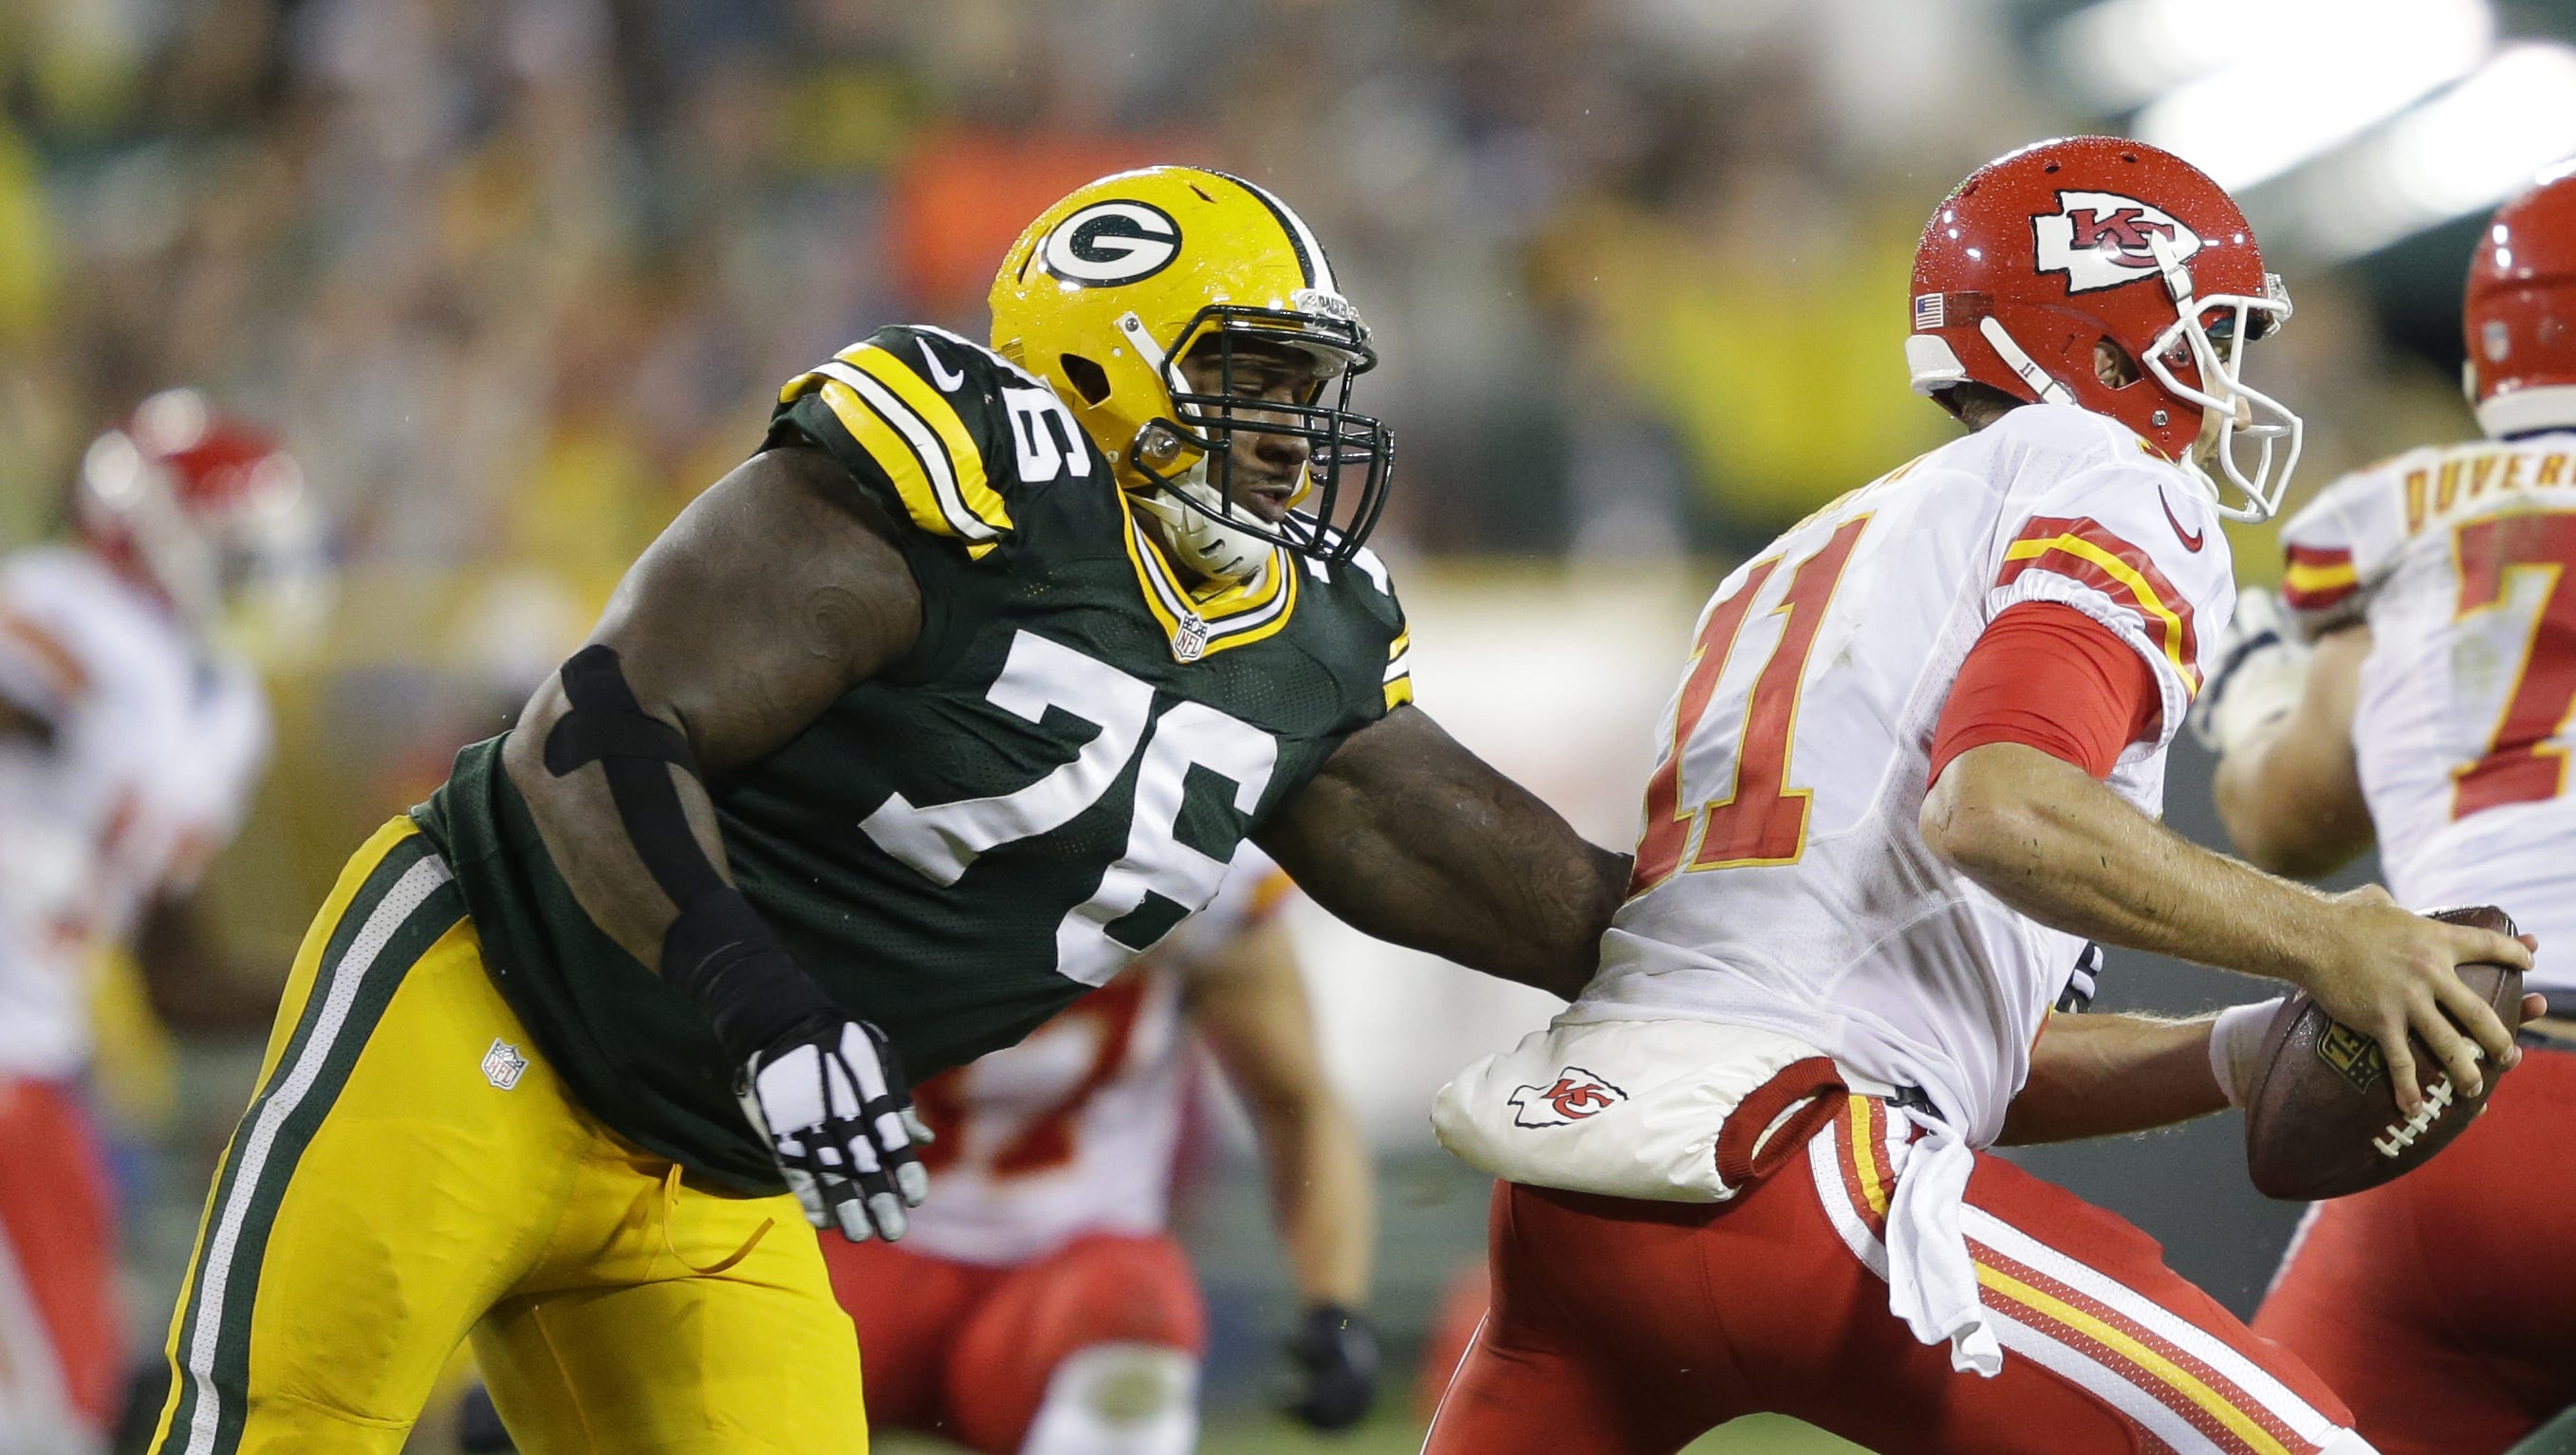 Green Bay Packers defensive end Mike Daniels (76) pressures Kansas City Chiefs quarterback Alex Smith (11) on Sept. 28, 2015, at Lambeau Field.